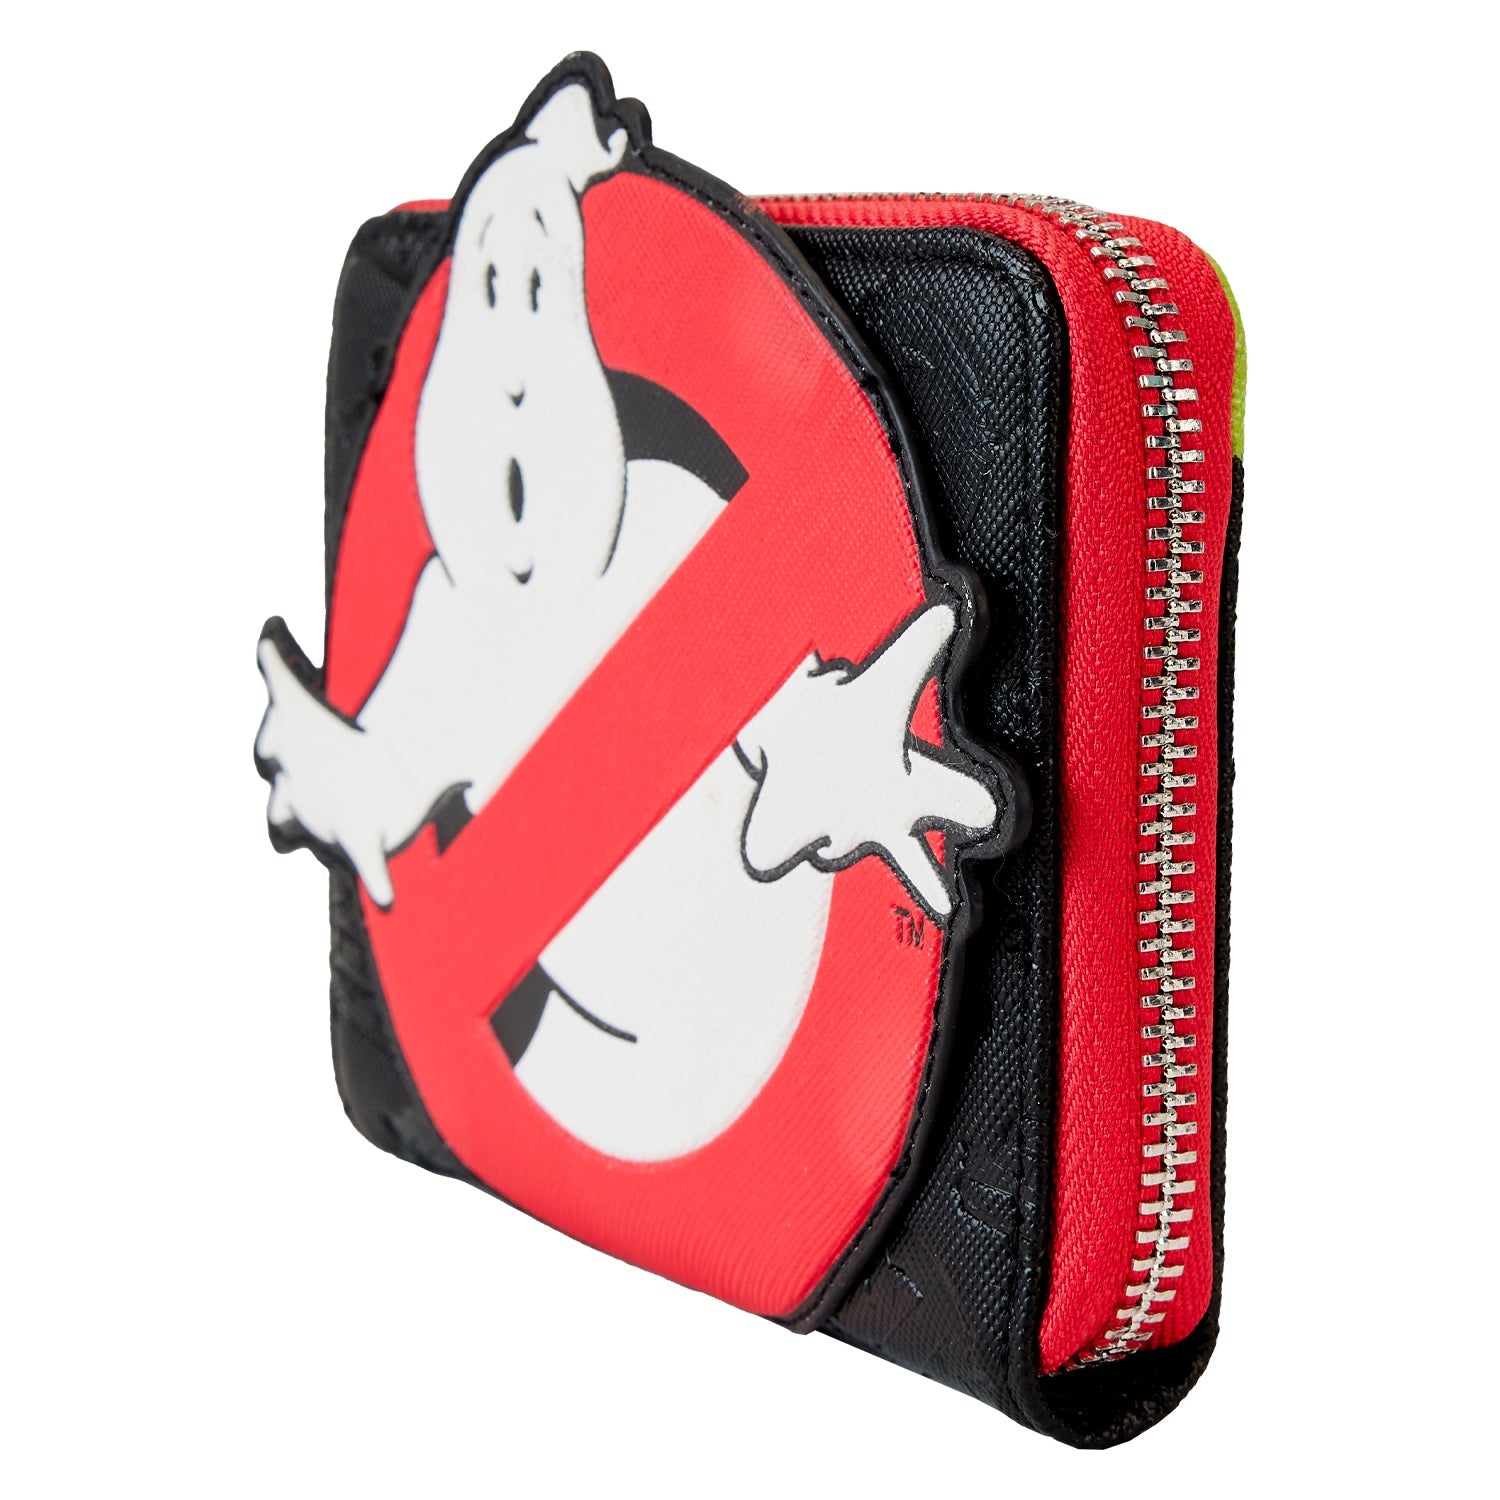 Loungefly x Ghostbusters No Ghost Logo Wallet - GeekCore